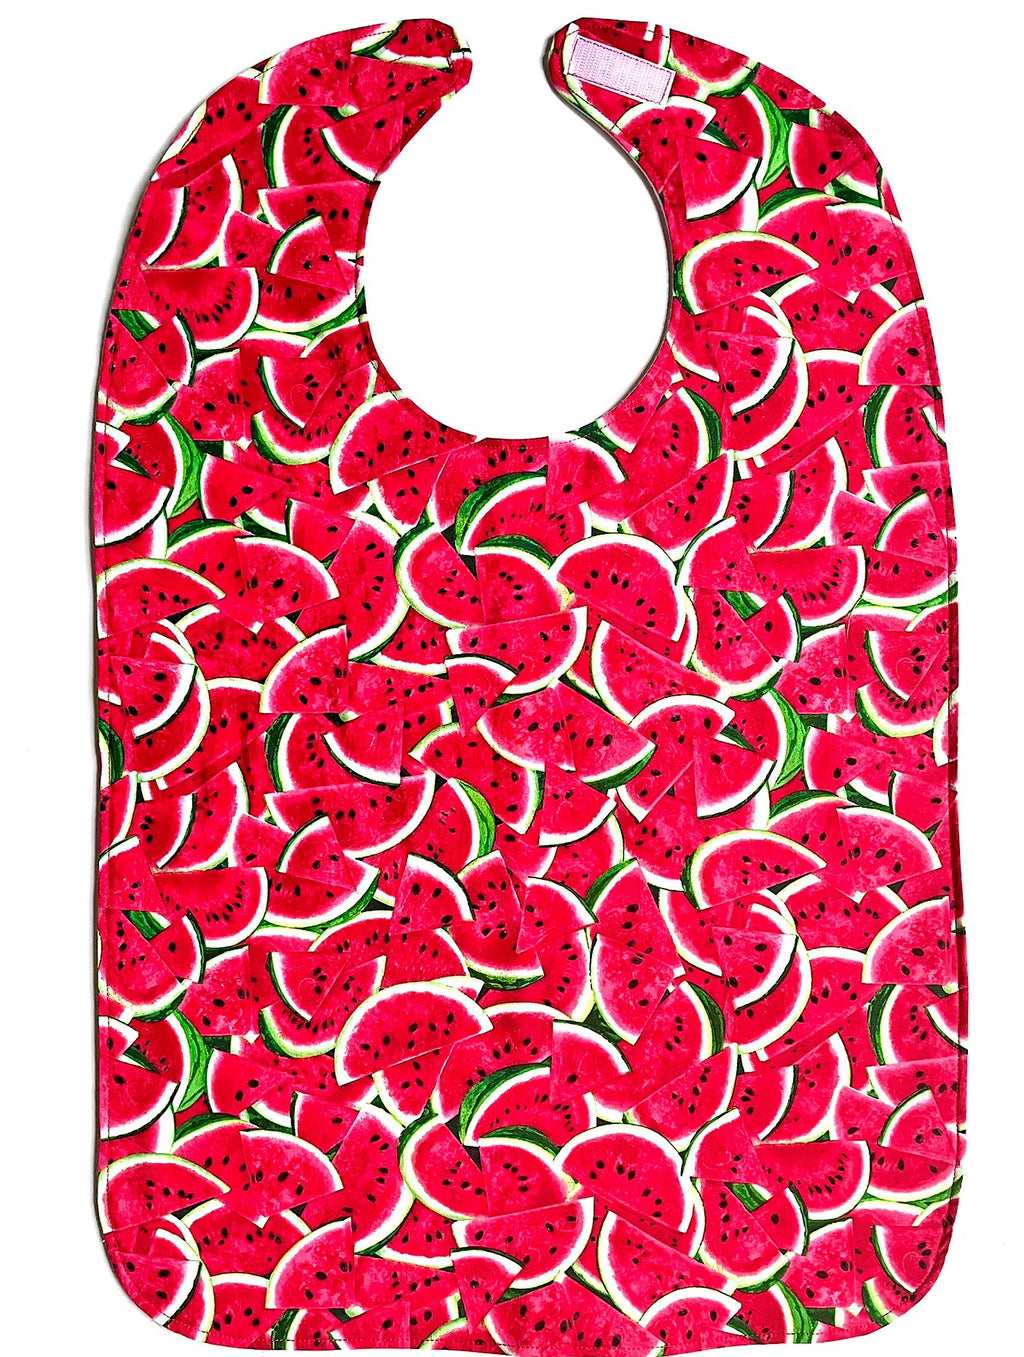 BAVETTE adult bib covered in red watermelon slices on three layers of machine washable premium cotton, Velcro back closure, 26" x 17" 